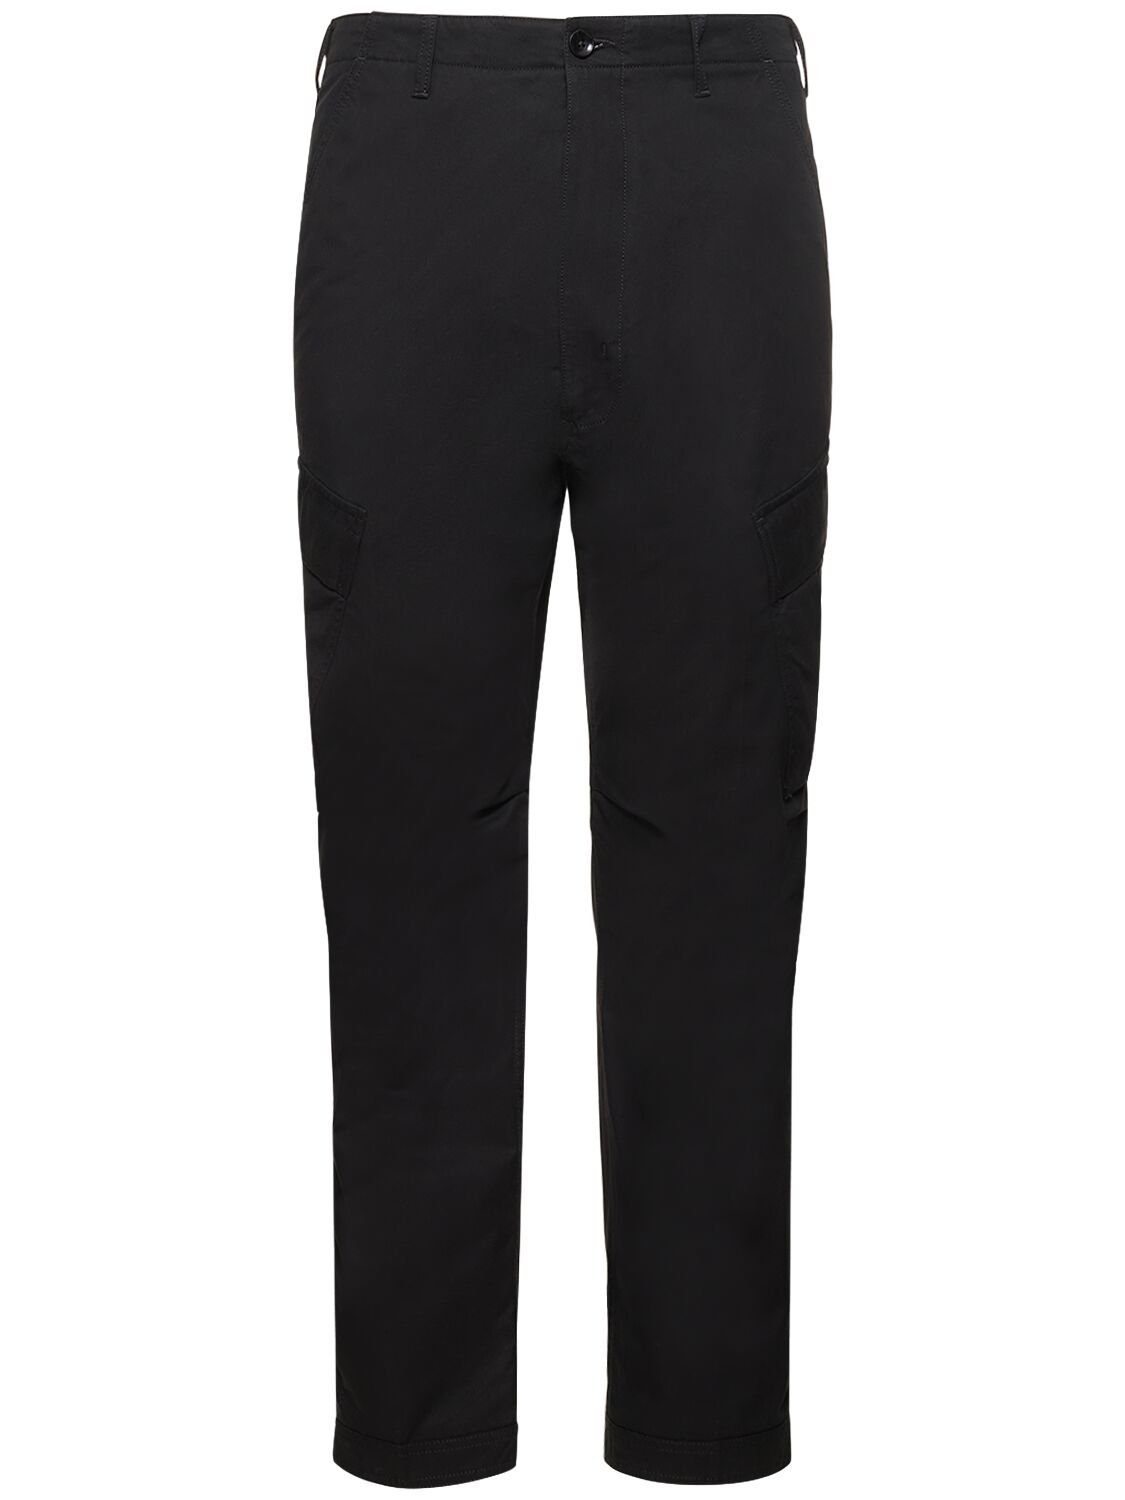 Image of Enzyme Twill Cargo Sport Pants